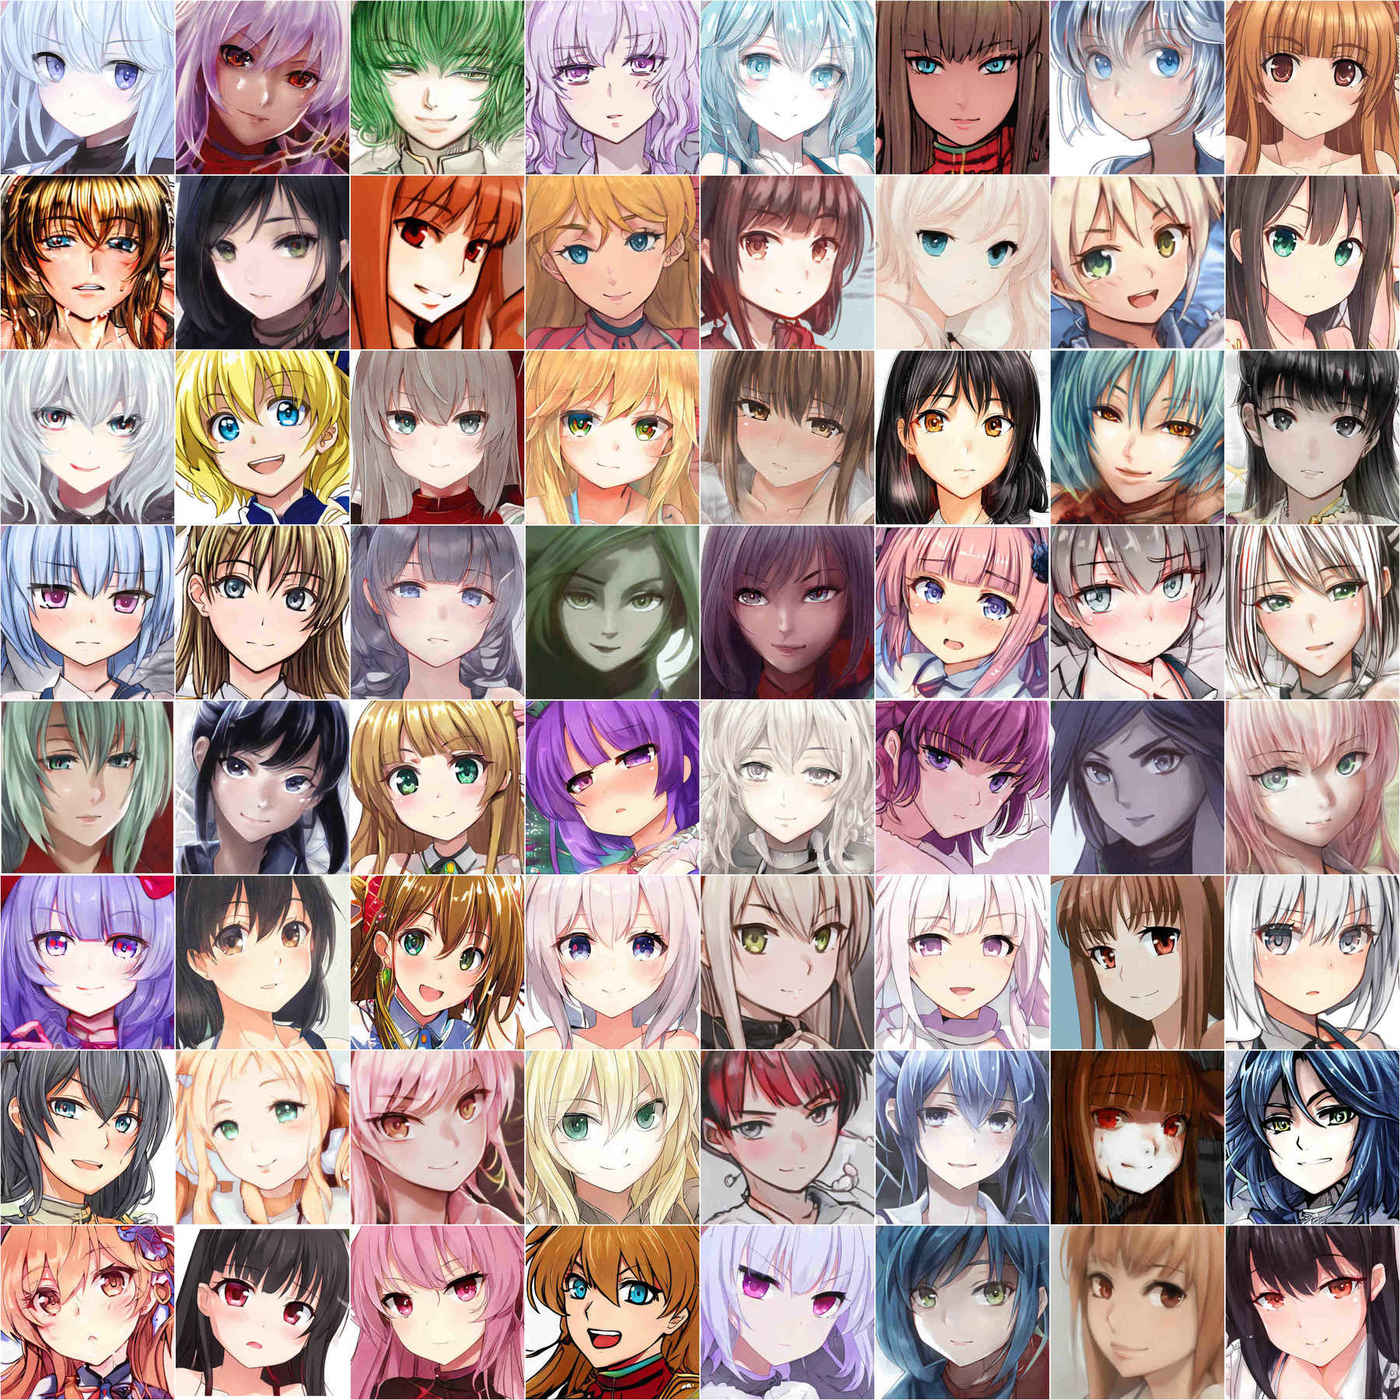 64 TWDNE face samples selected from social media, in an 8×8 grid.